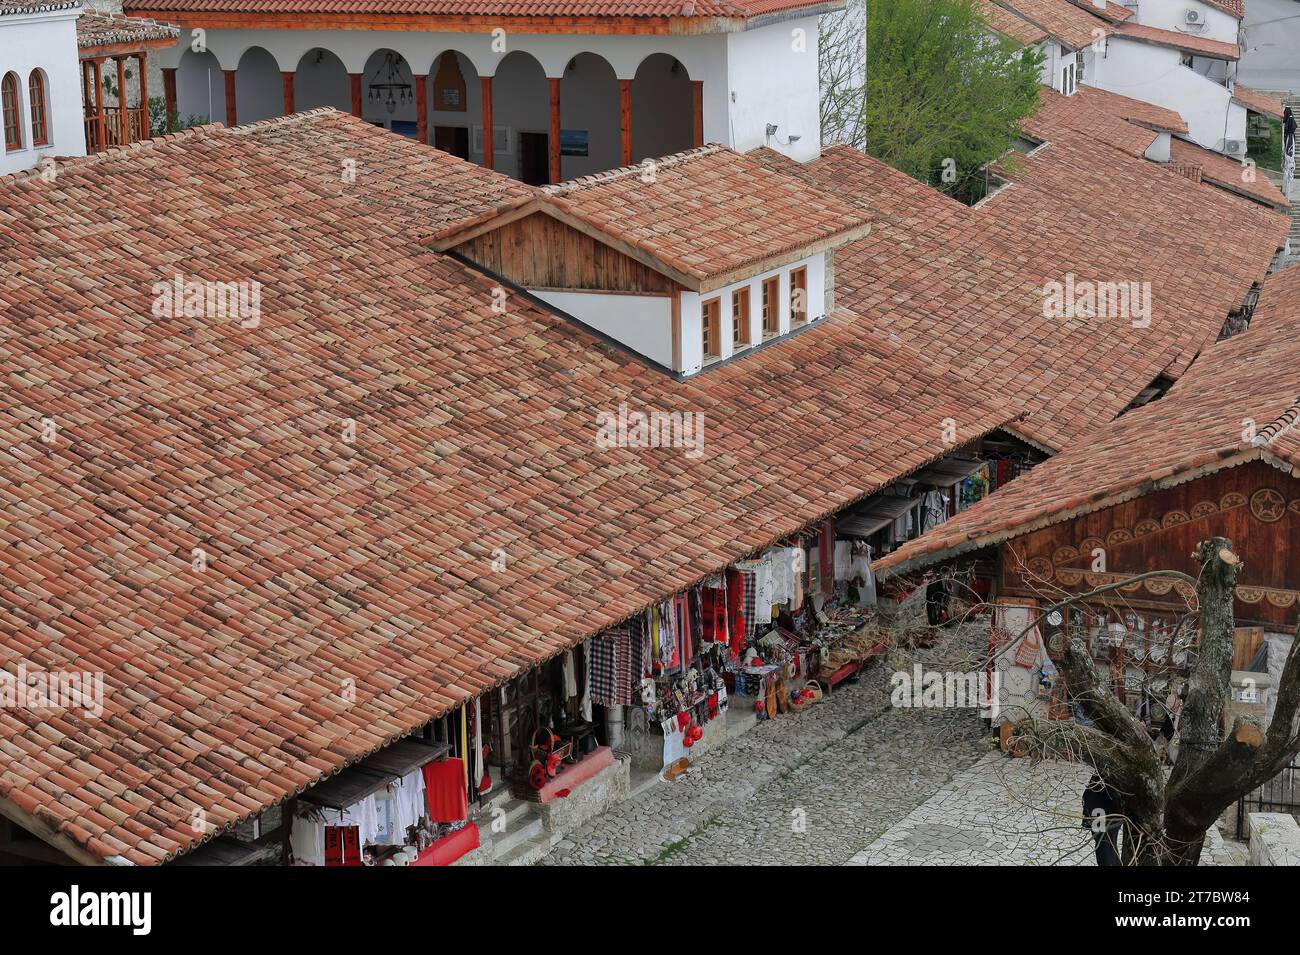 037 The Old Bazaar - Pazari i Vjeter- in traditional style houses on the main street leading up to the castle. Kruje-Albania. Stock Photo